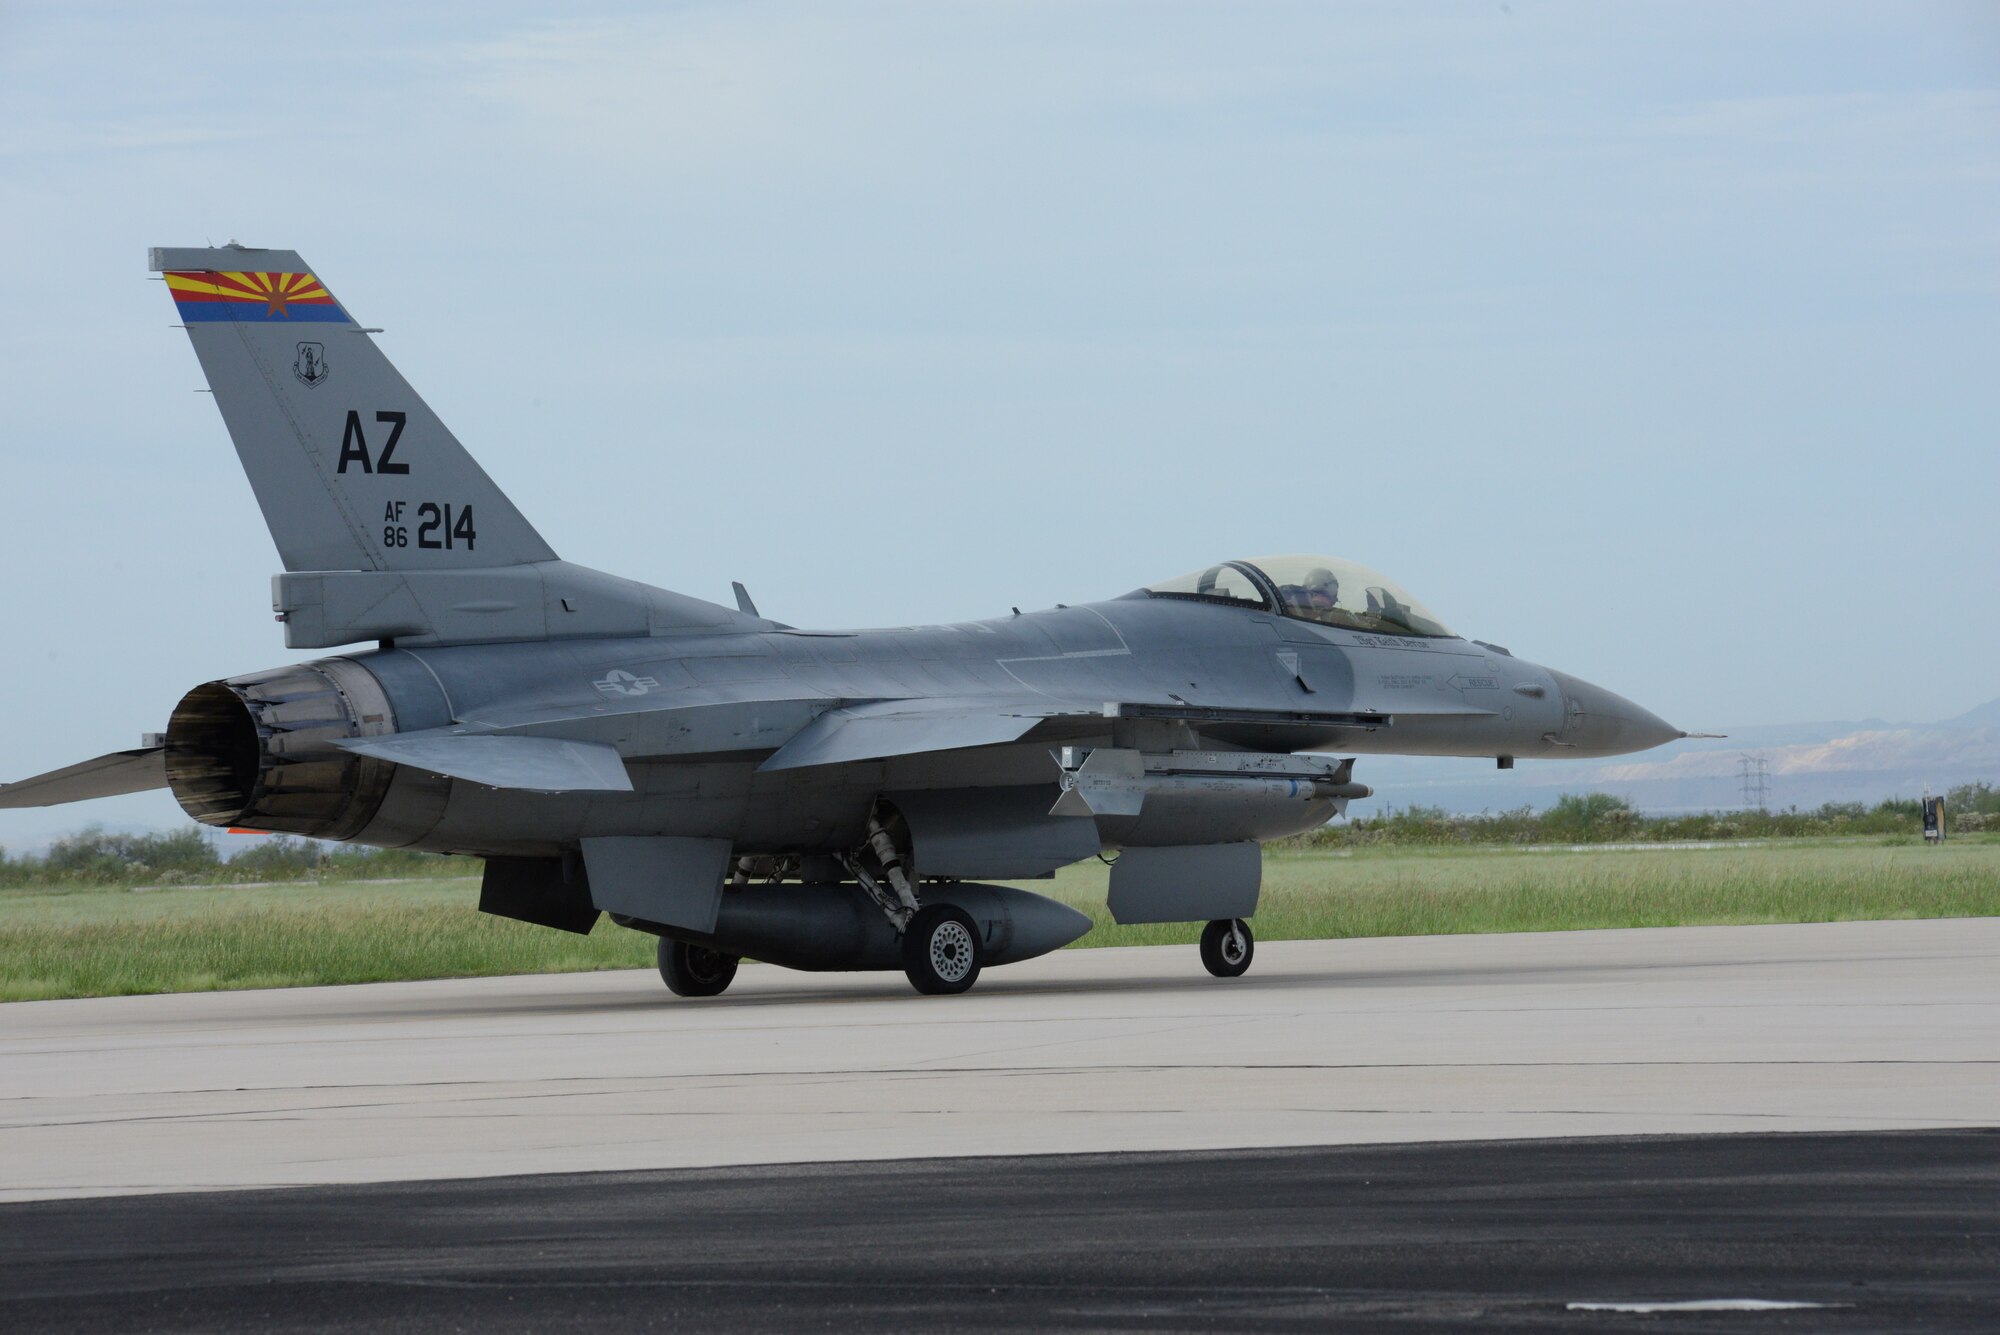 An F-16 from the Aerospace Control Alert Detachment from the 162nd Wing taxis down a runway at Davis-Monthan Air Force Base in Tucson, Arizona, Sept. 12, 2015. The detachment maintains the ability to quickly scramble in response to airborne threats in the Southwest United States, as well as proactively defend large gatherings and high profile events. (Air National Guard photo by Senior Airman Jackson Hurd)